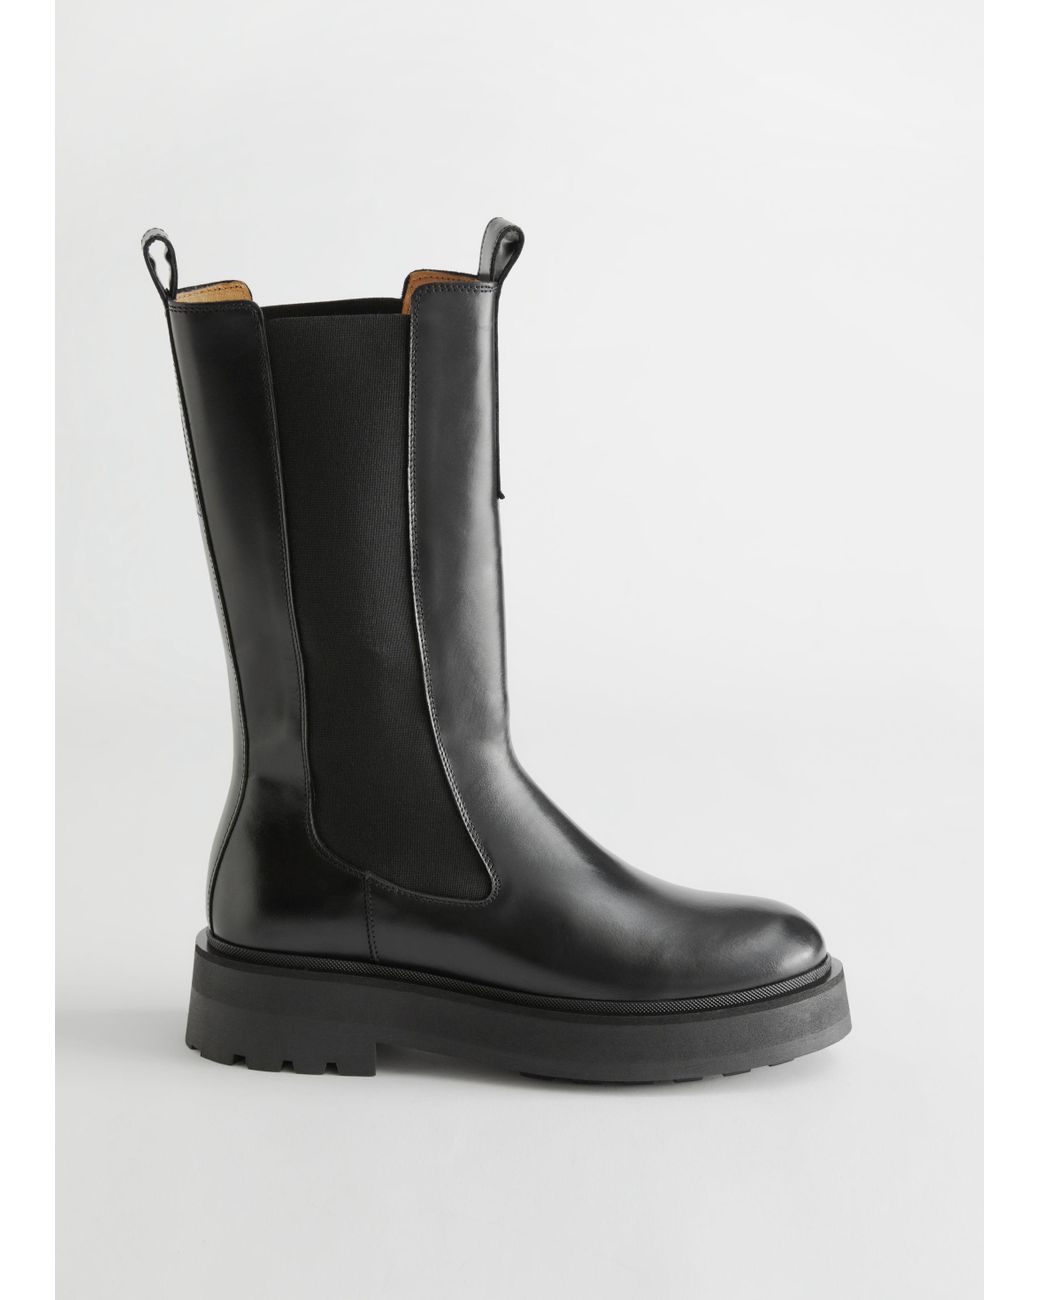 & Other Stories Tall Leather Chelsea Boots in Black - Lyst